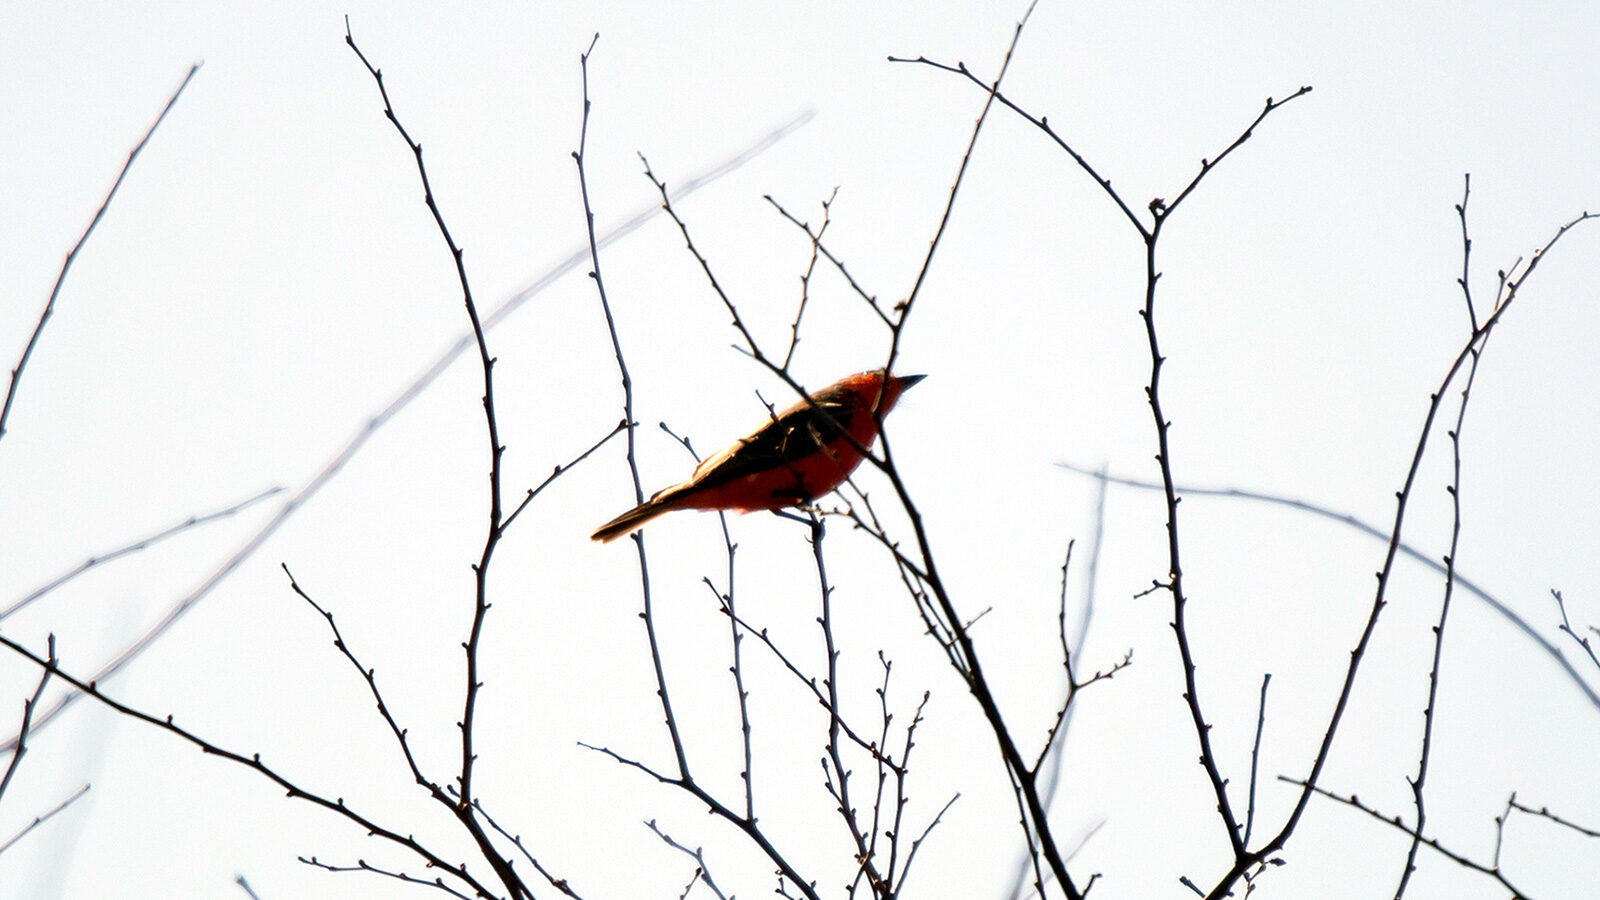 Vermillion flycatcher perched in a bare tree